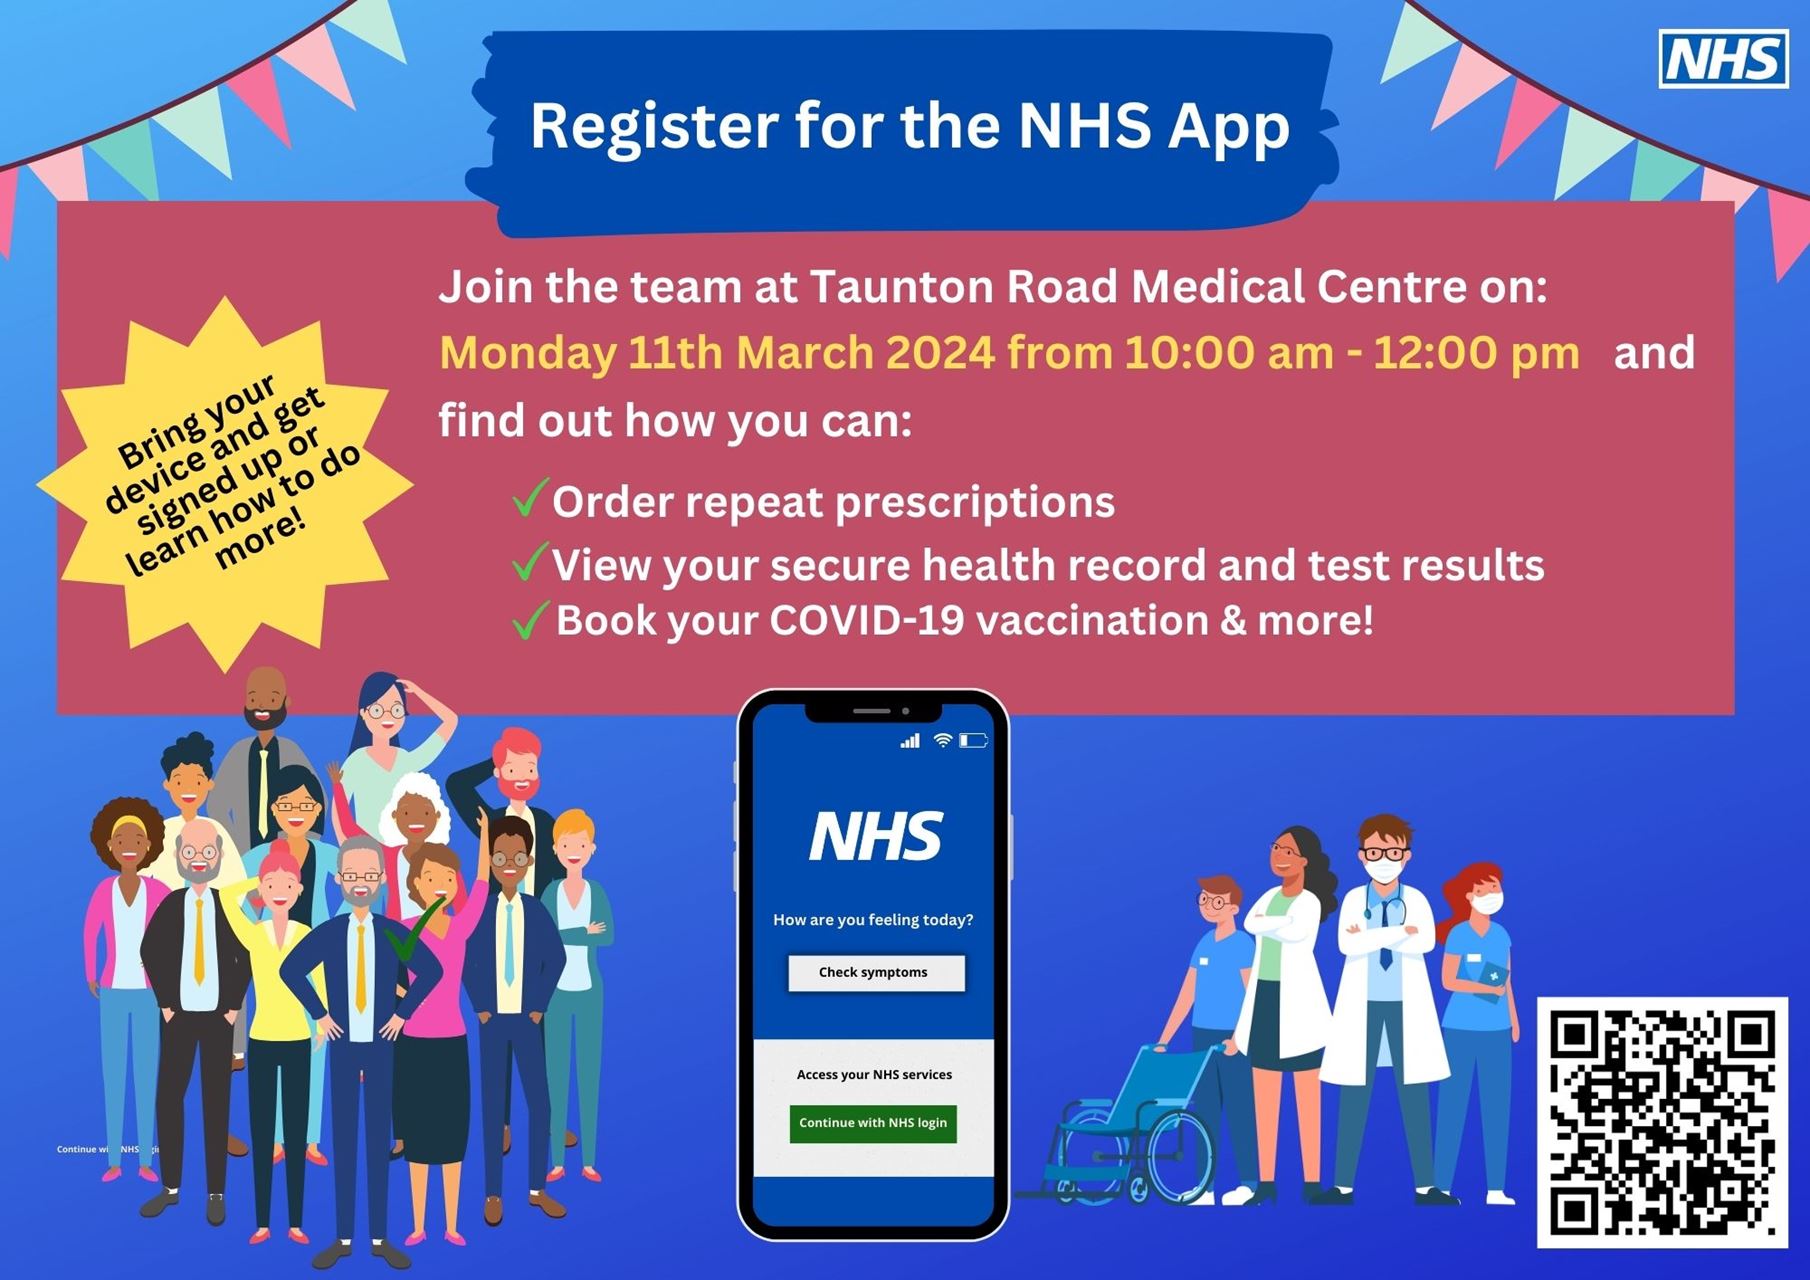 Join the team at Taunton Road Medical Centre on Monday 11th March 2024 from 10:00 to 12:00 to find out how you can use the NHS App to order repeat prescriptions and view your secure health record. Bring your device for help on signing up or learn how to do more!